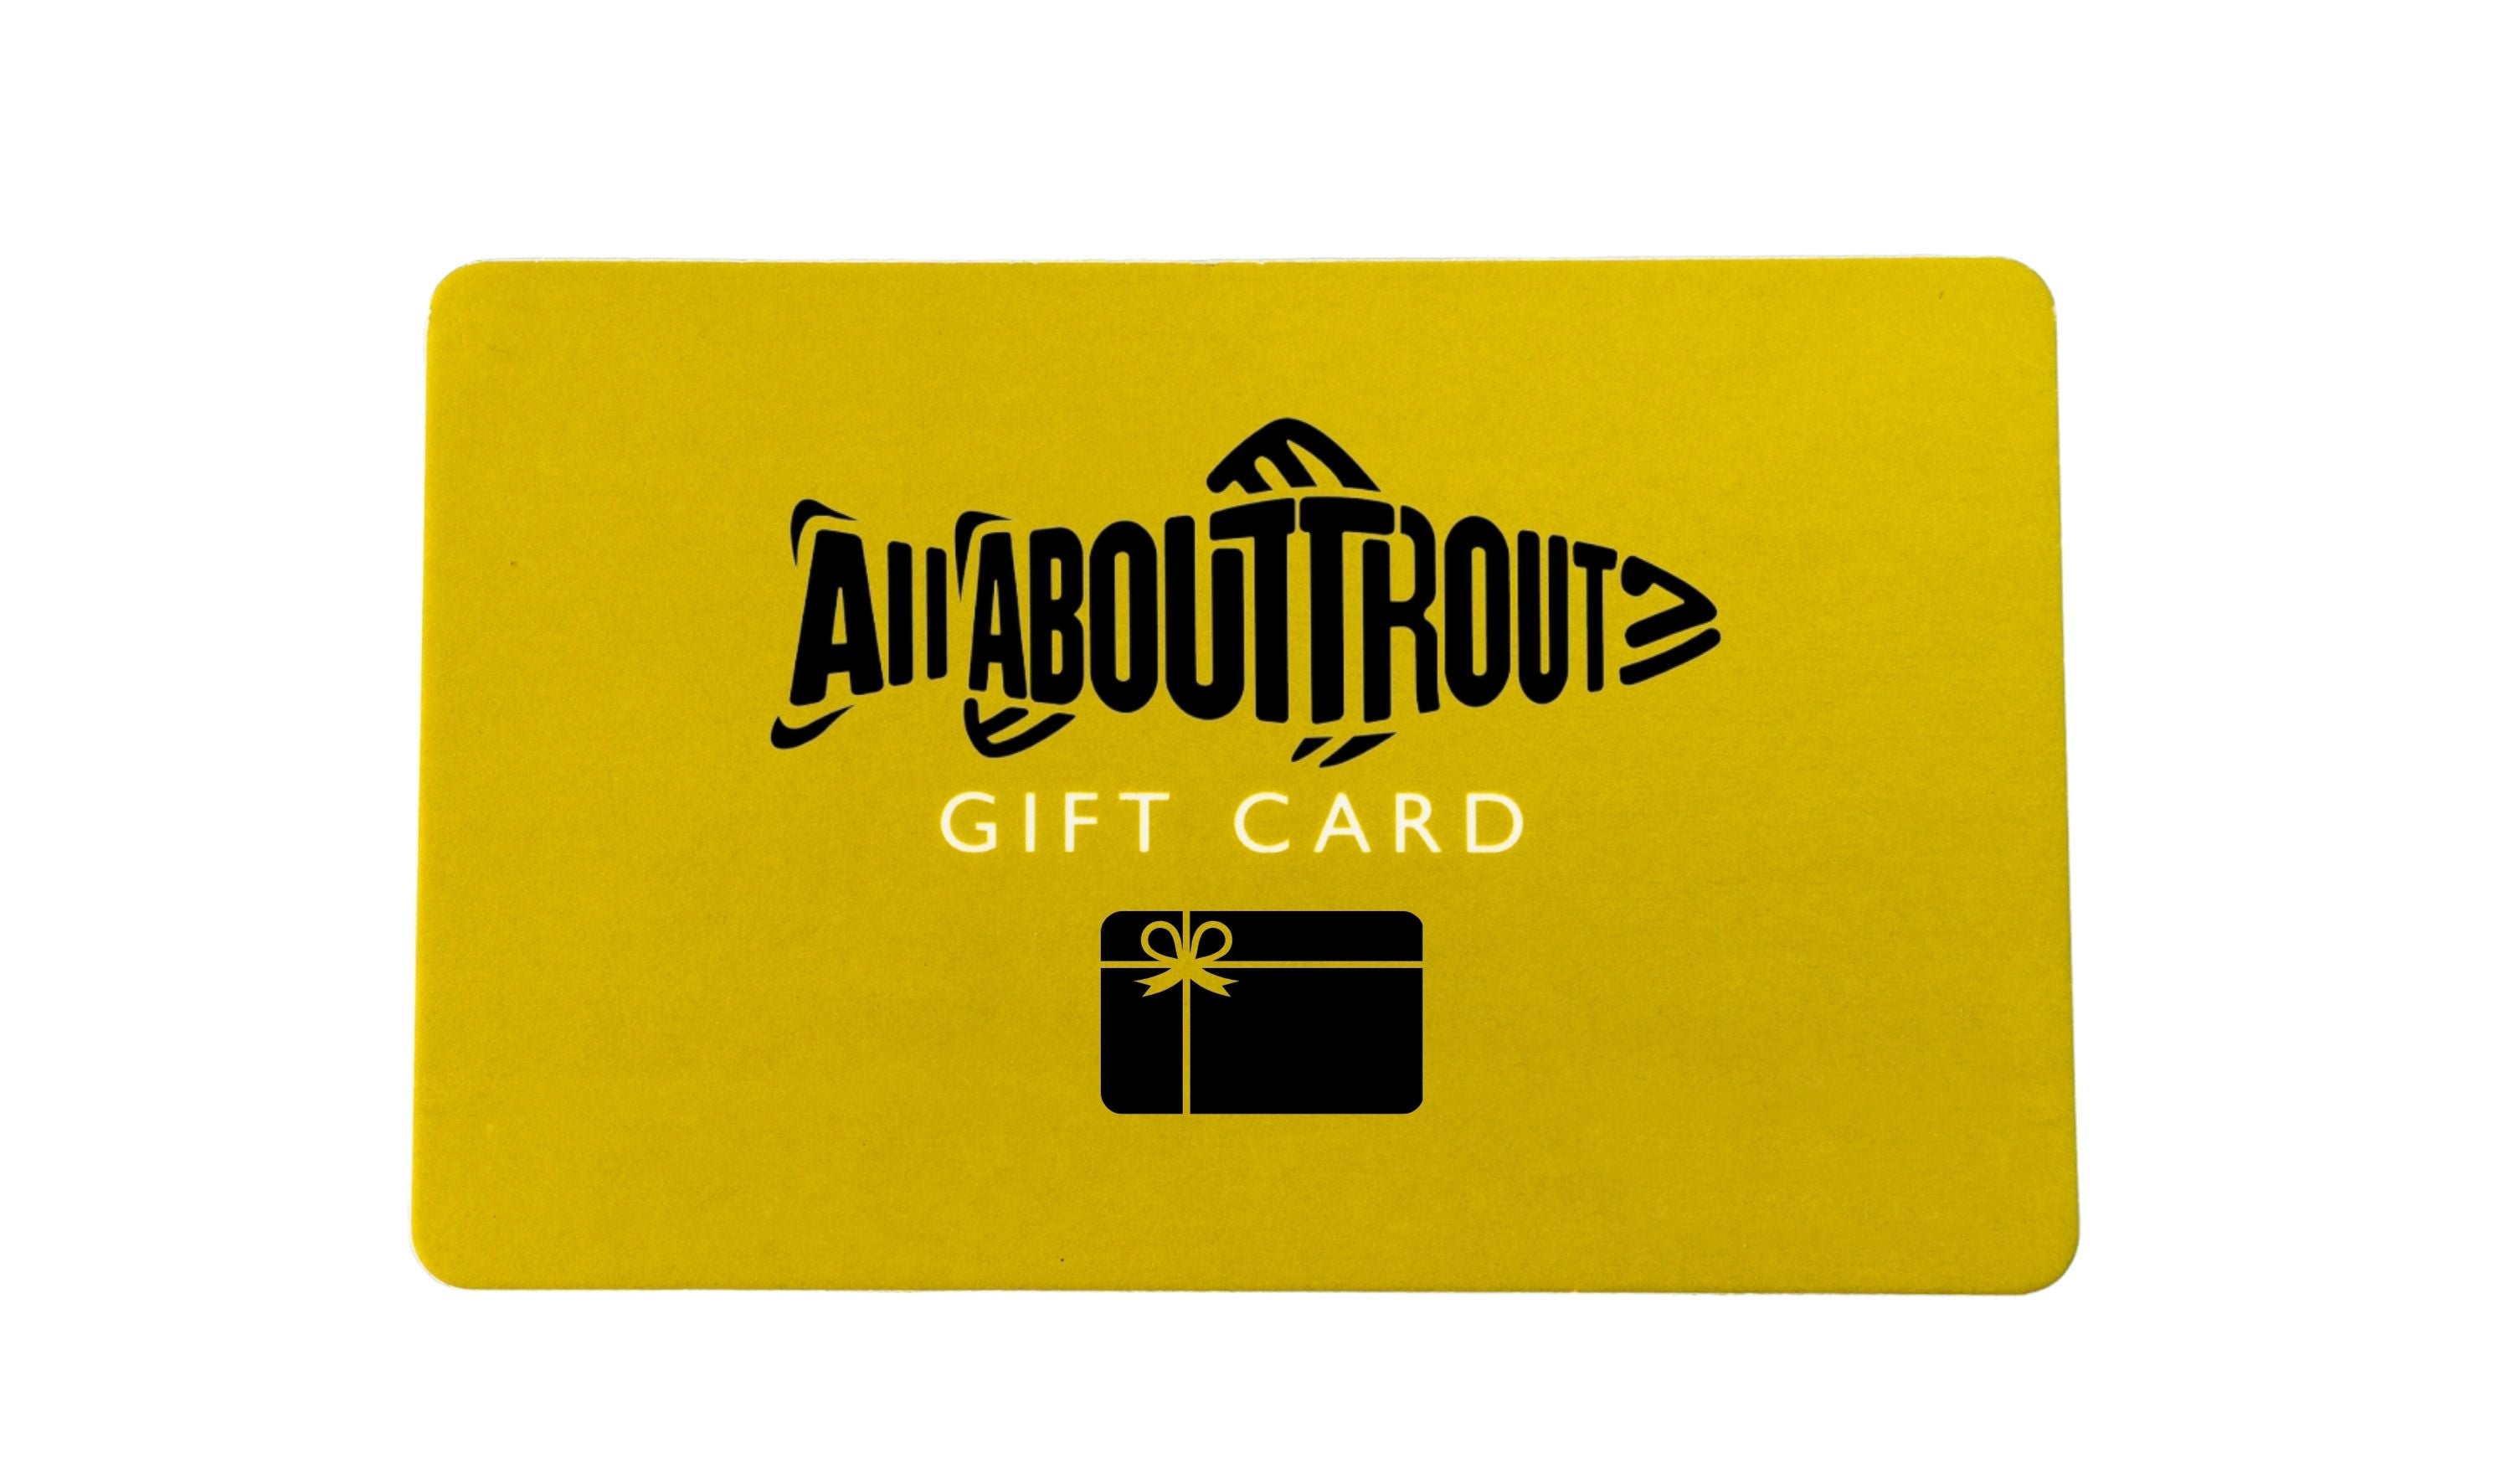 All About Trout Gift Card